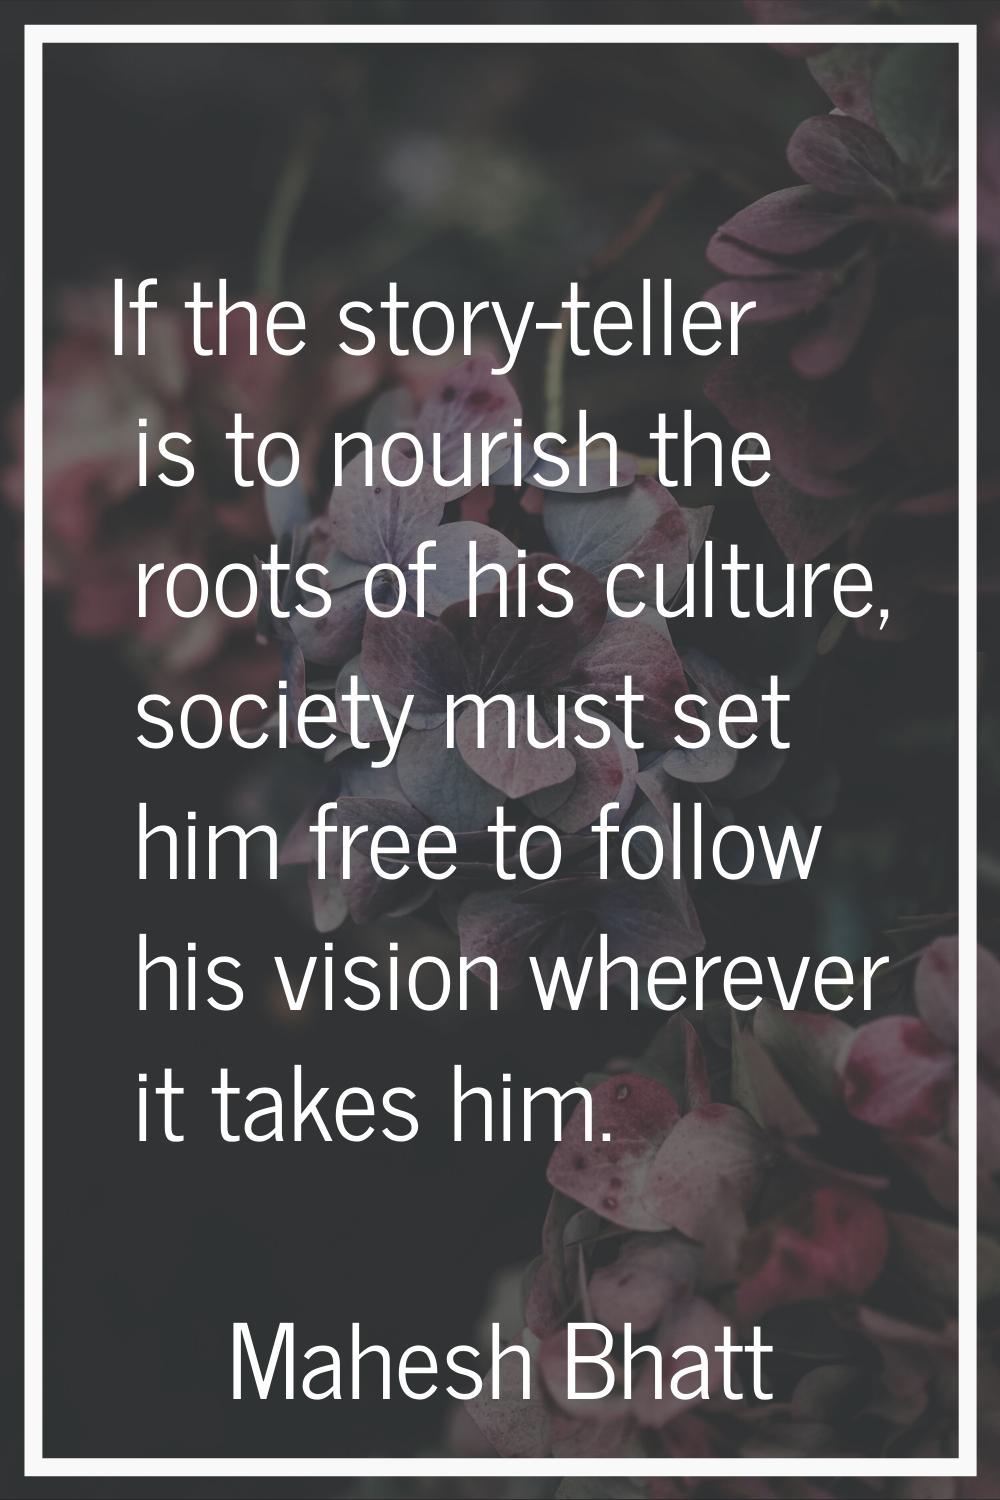 If the story-teller is to nourish the roots of his culture, society must set him free to follow his